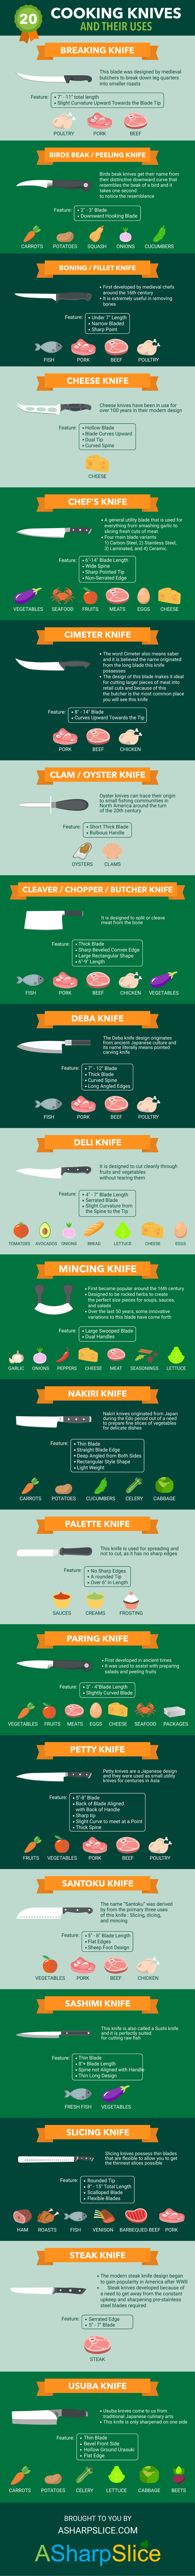 20 Types of Kitchen Knives And Their Uses